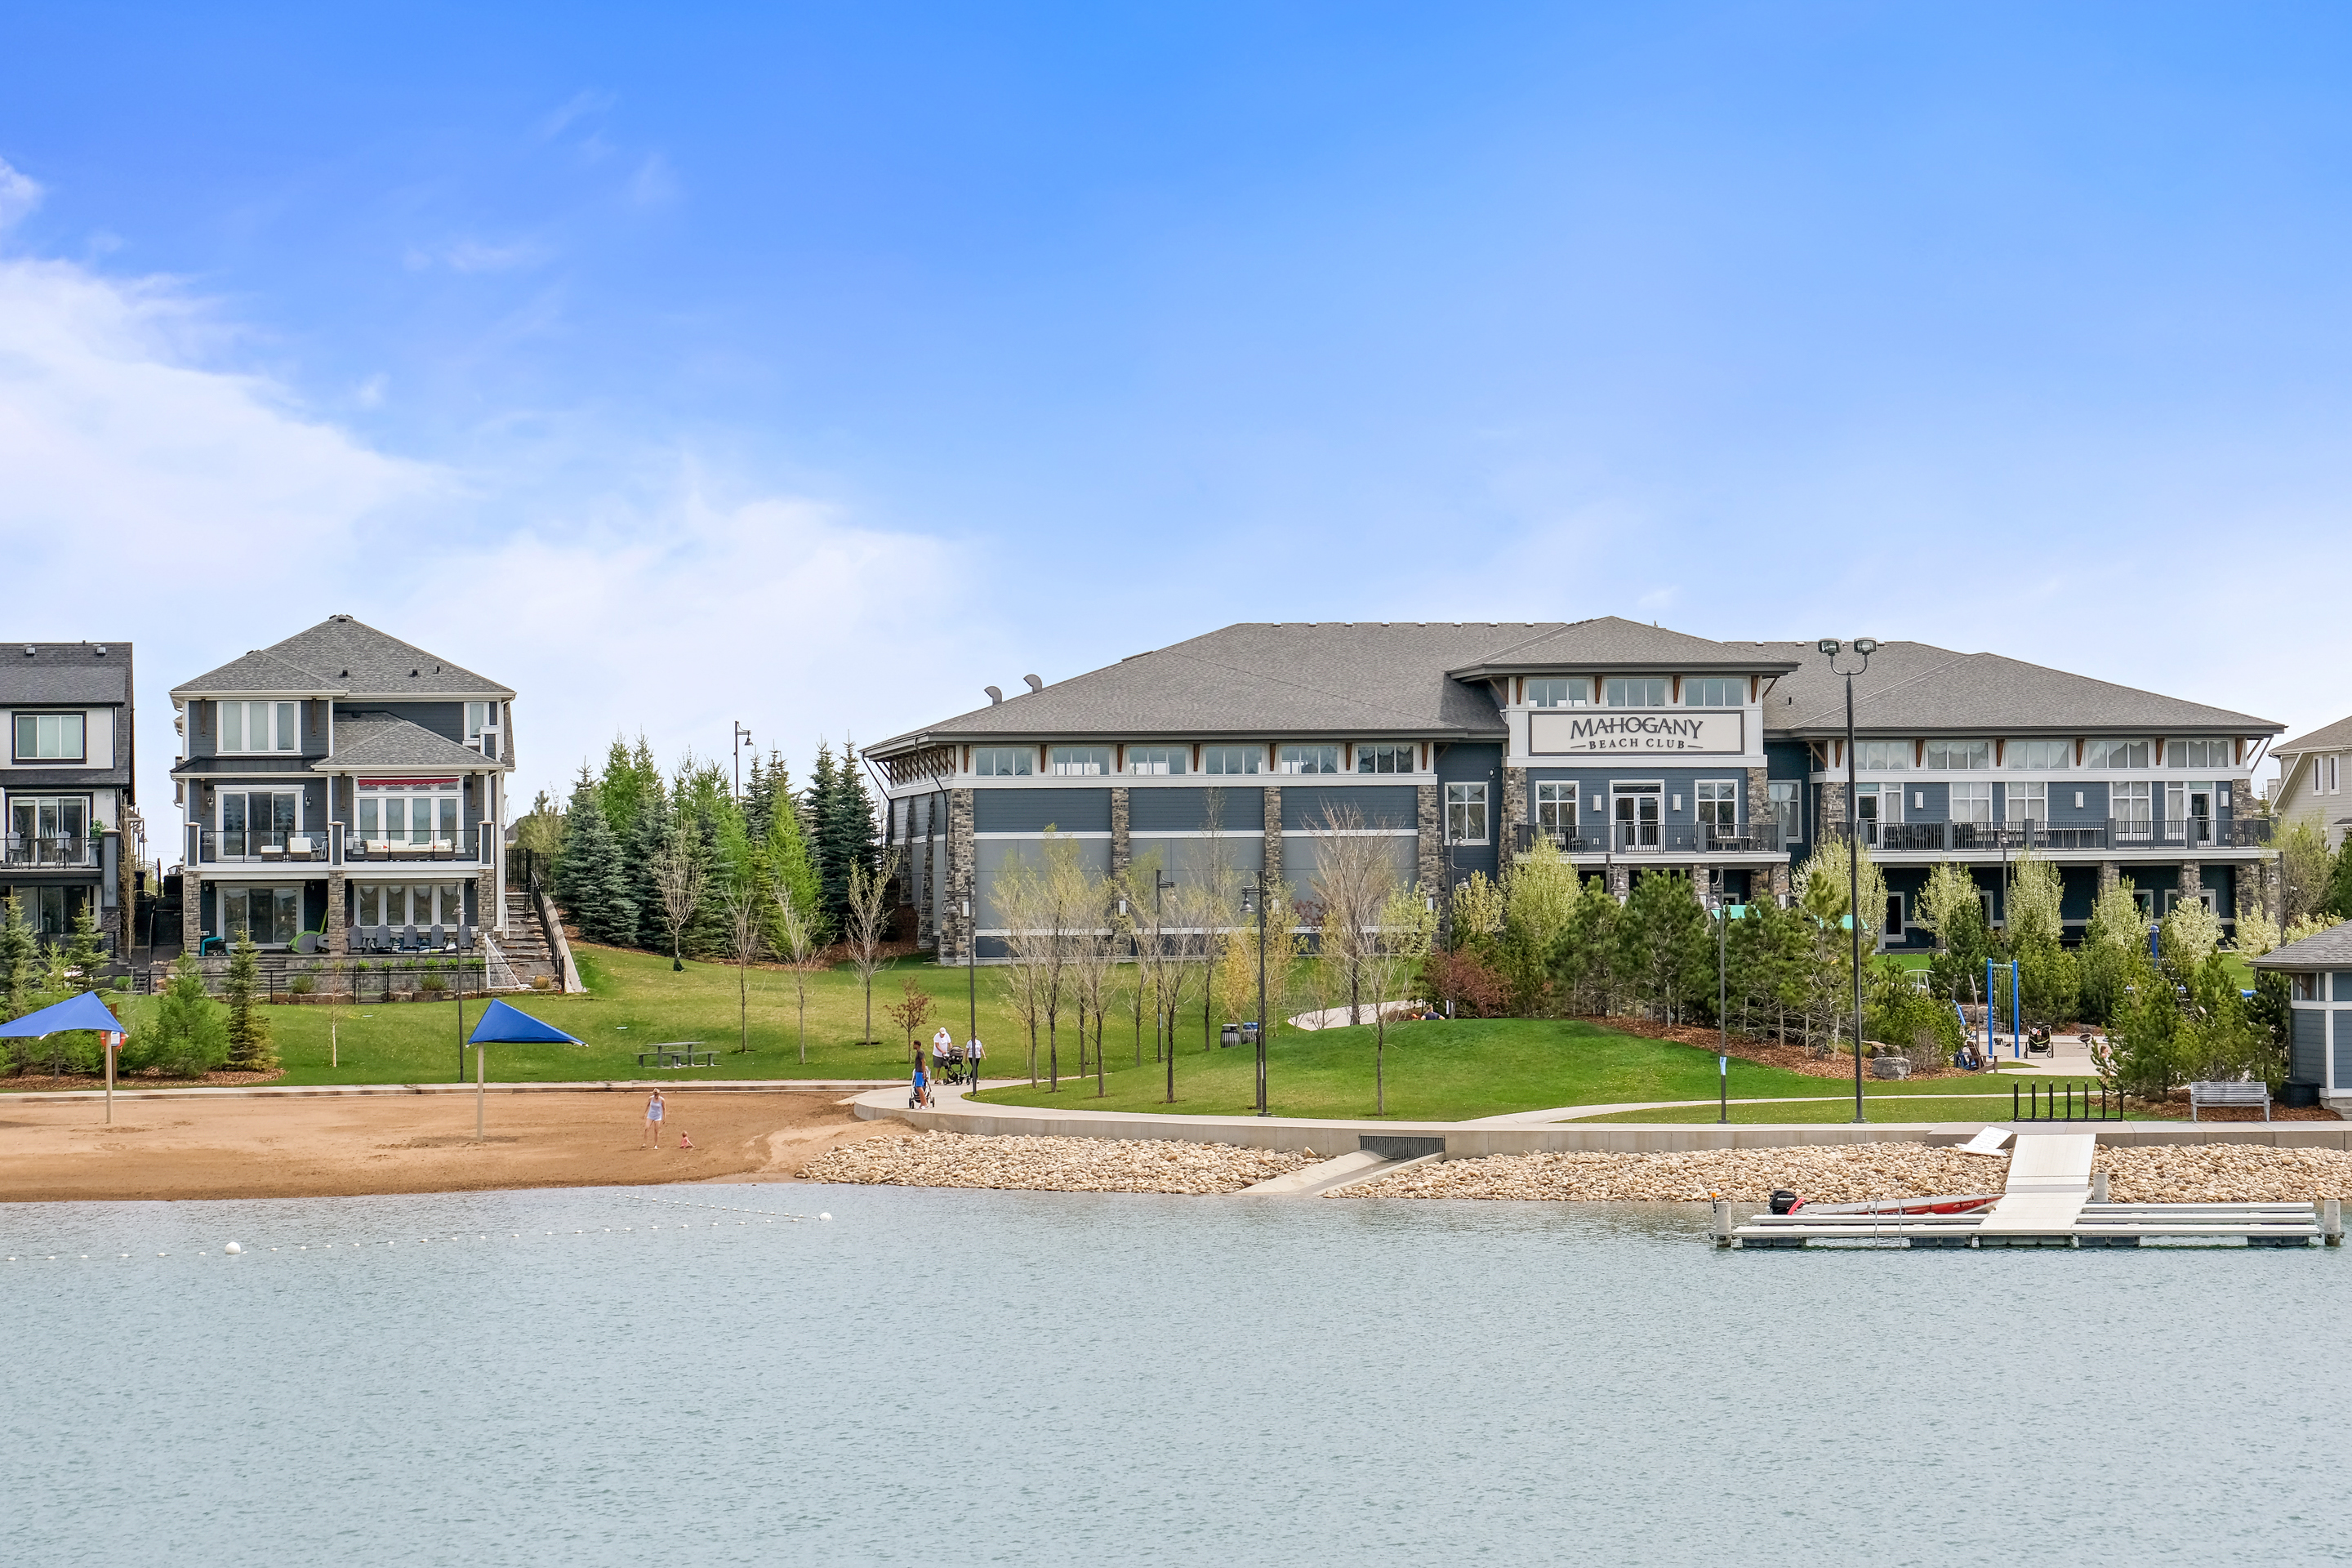 The Mahogany Beach club in SE Calgary with beautiful lakefront Calgary homes for sale